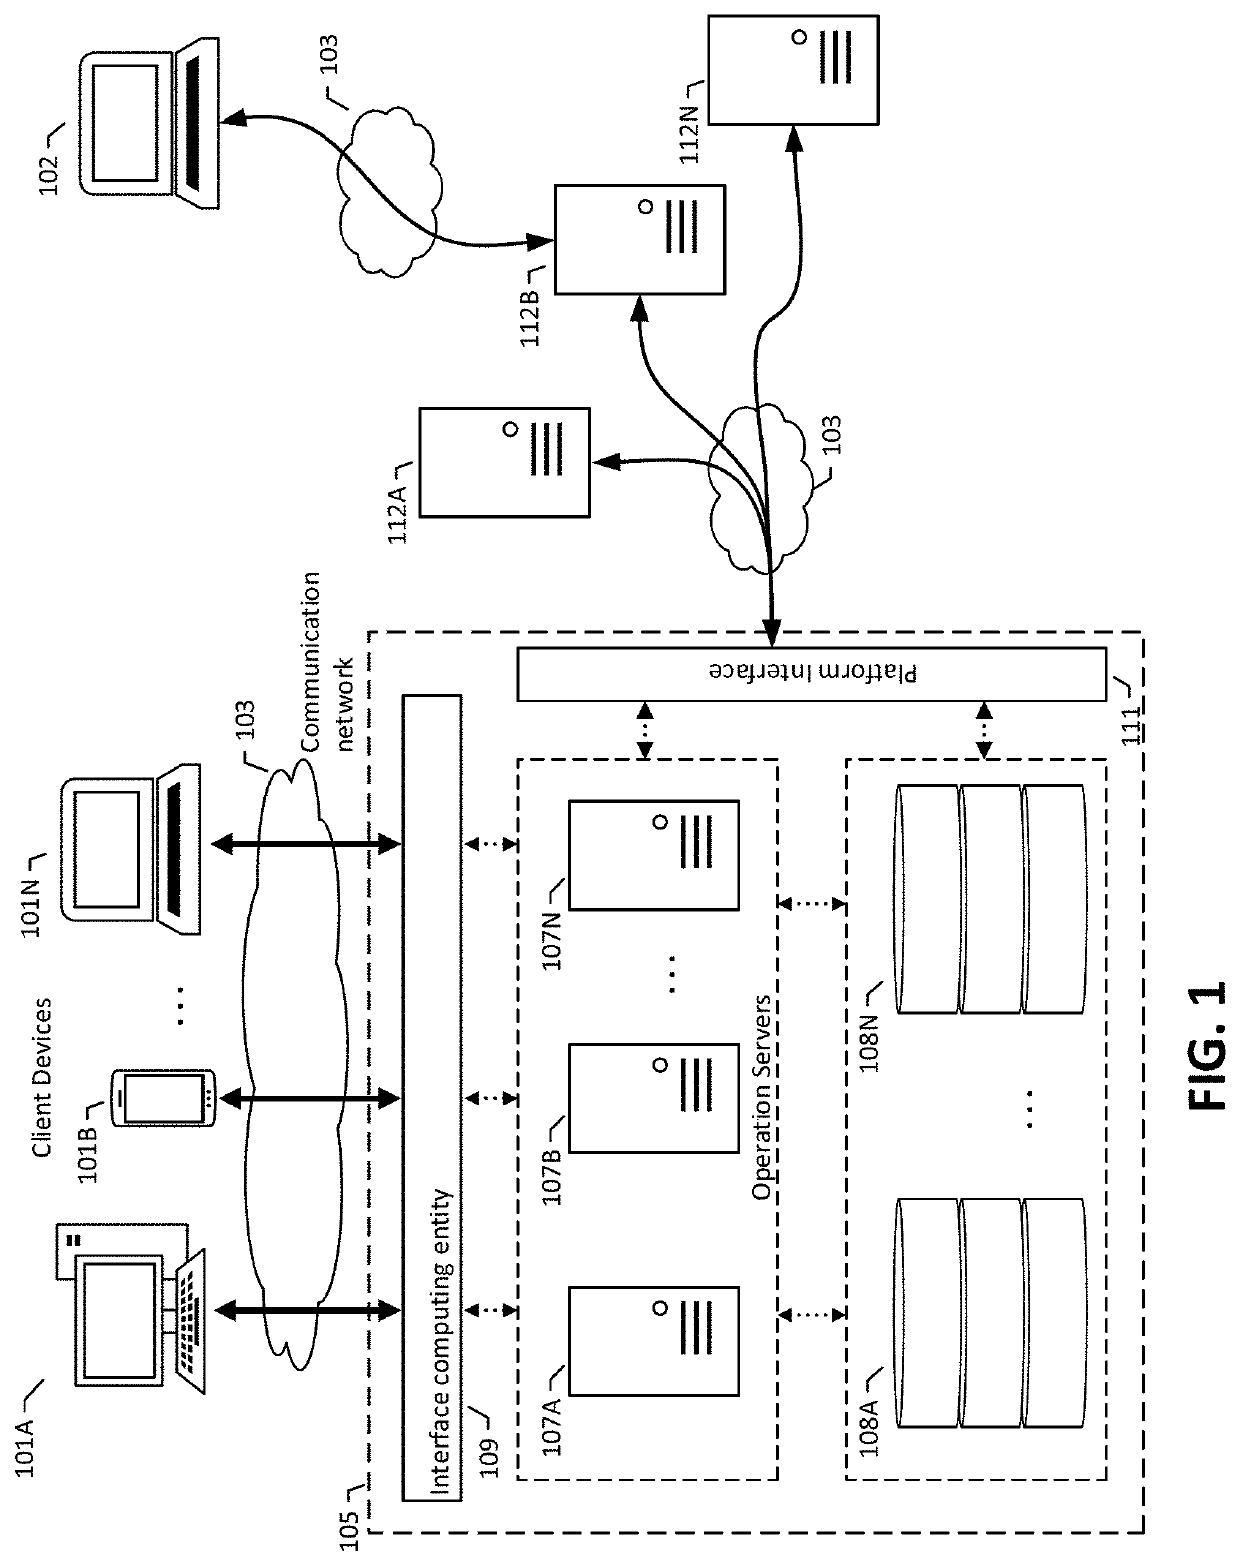 Expandable data object management and indexing architecture for intersystem data exchange compatibility